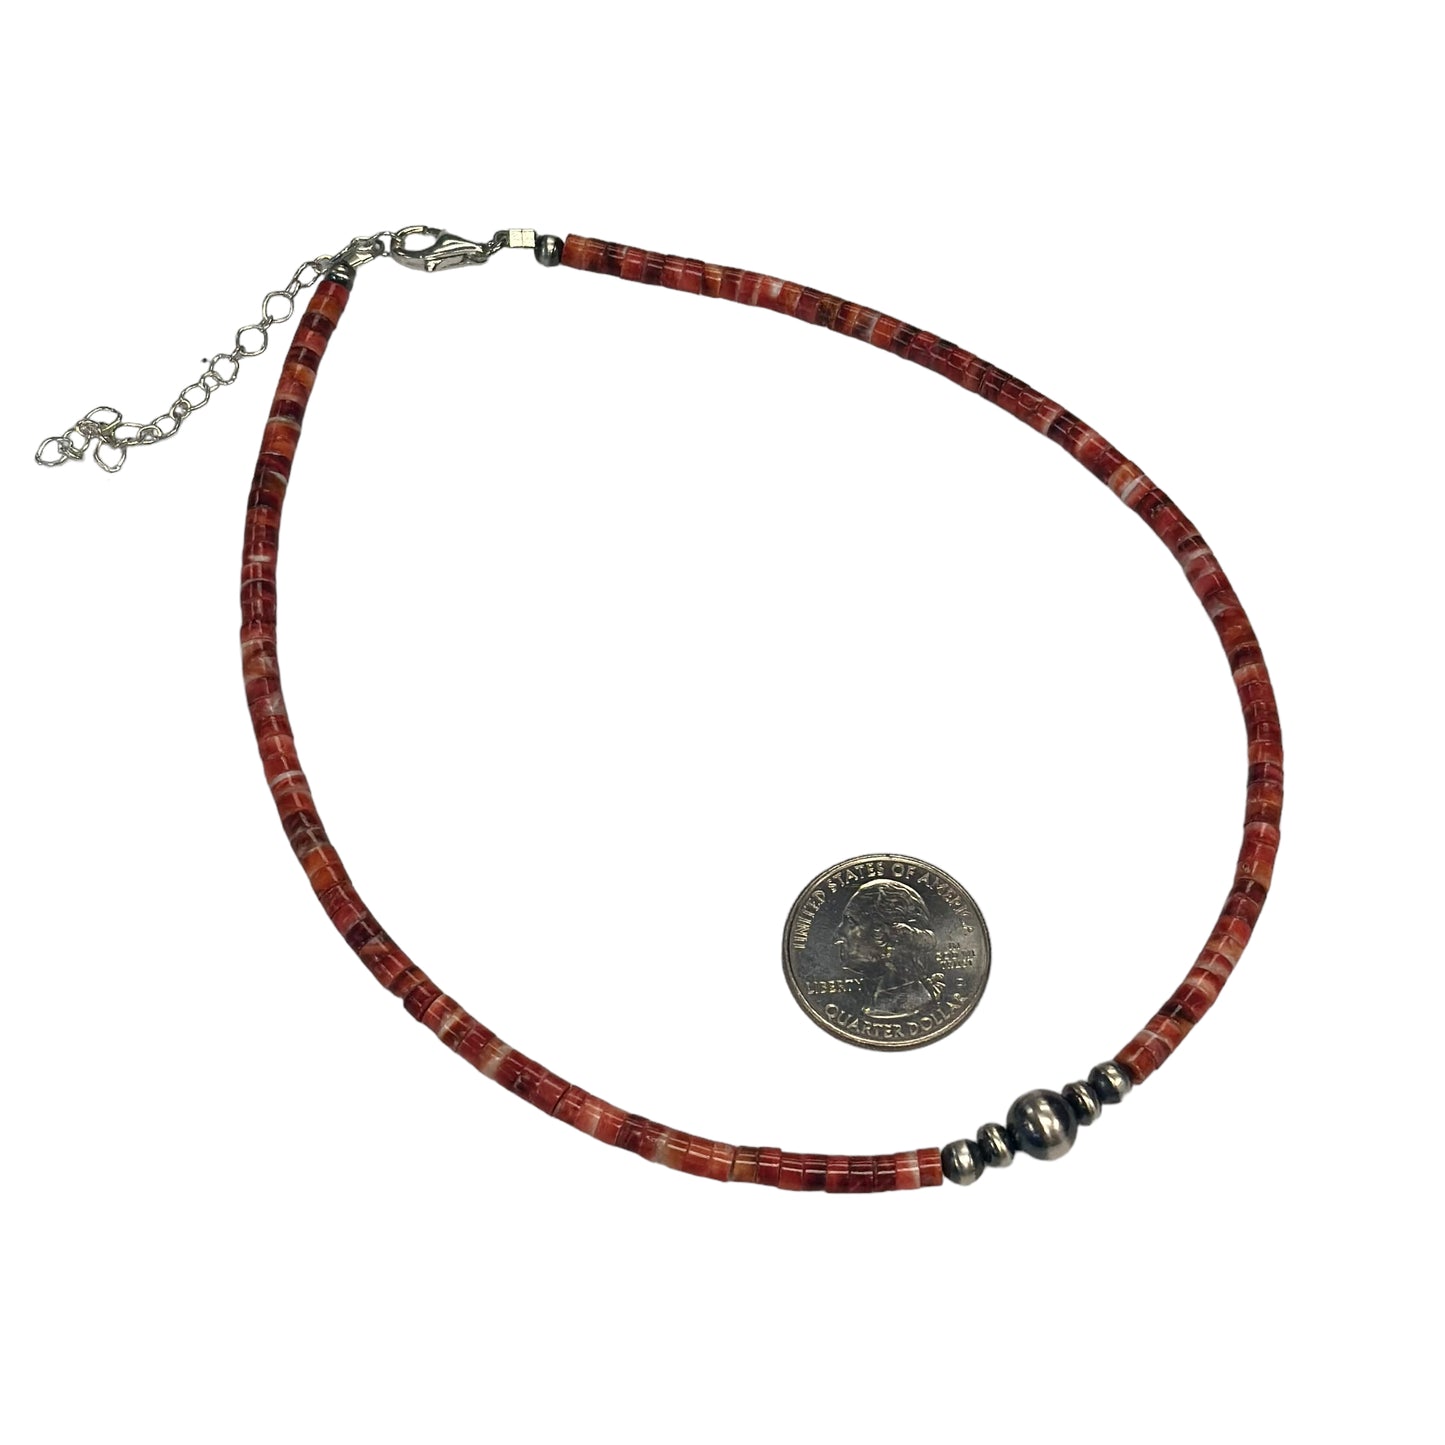 Red Spiny Oyster Desert Pearl Bead Necklace Sterling Silver